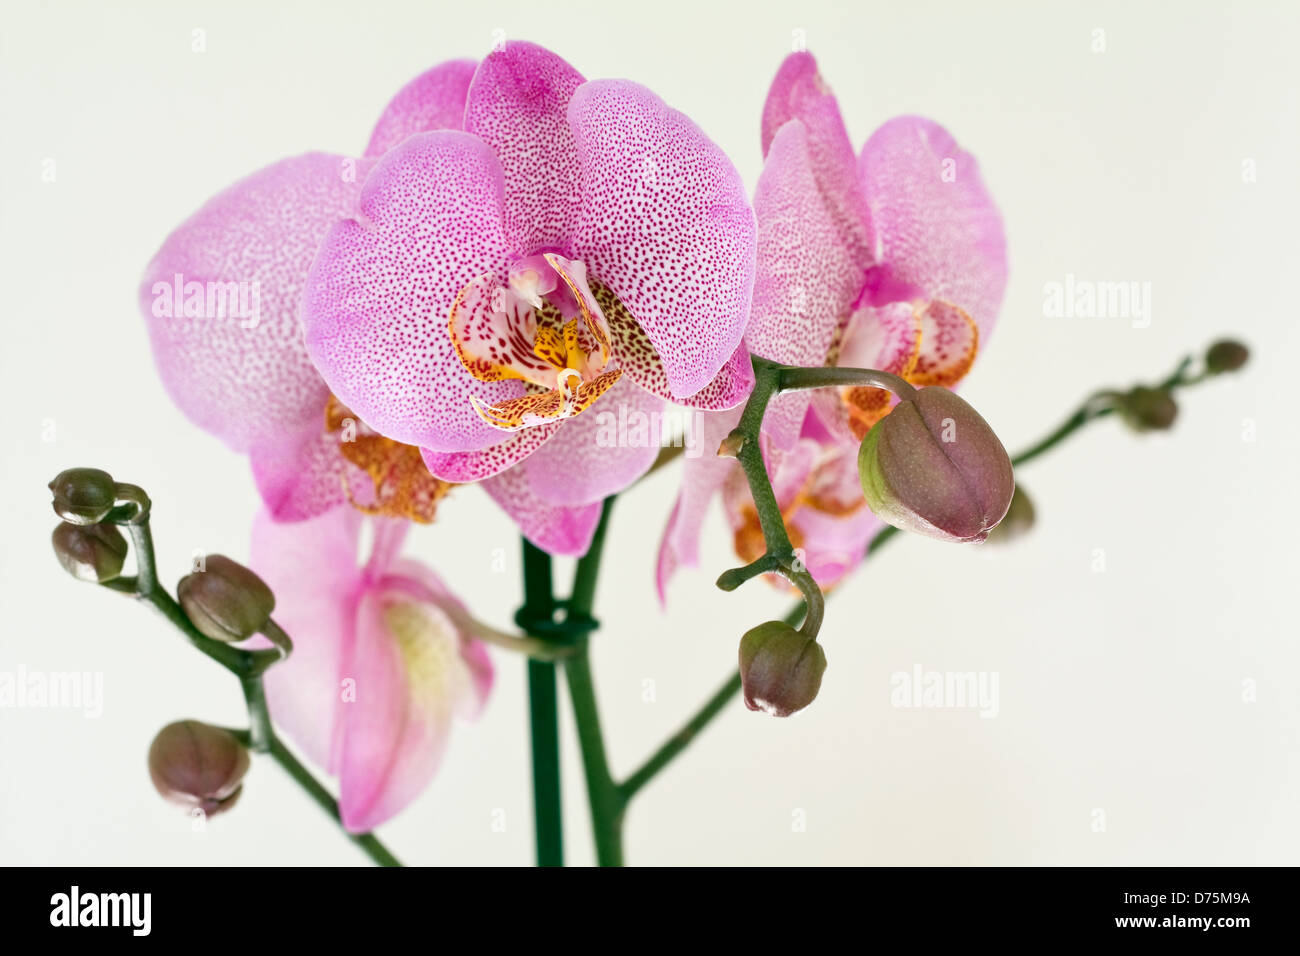 Pink speckled Phalaenopsis orchid on white background. Stock Photo